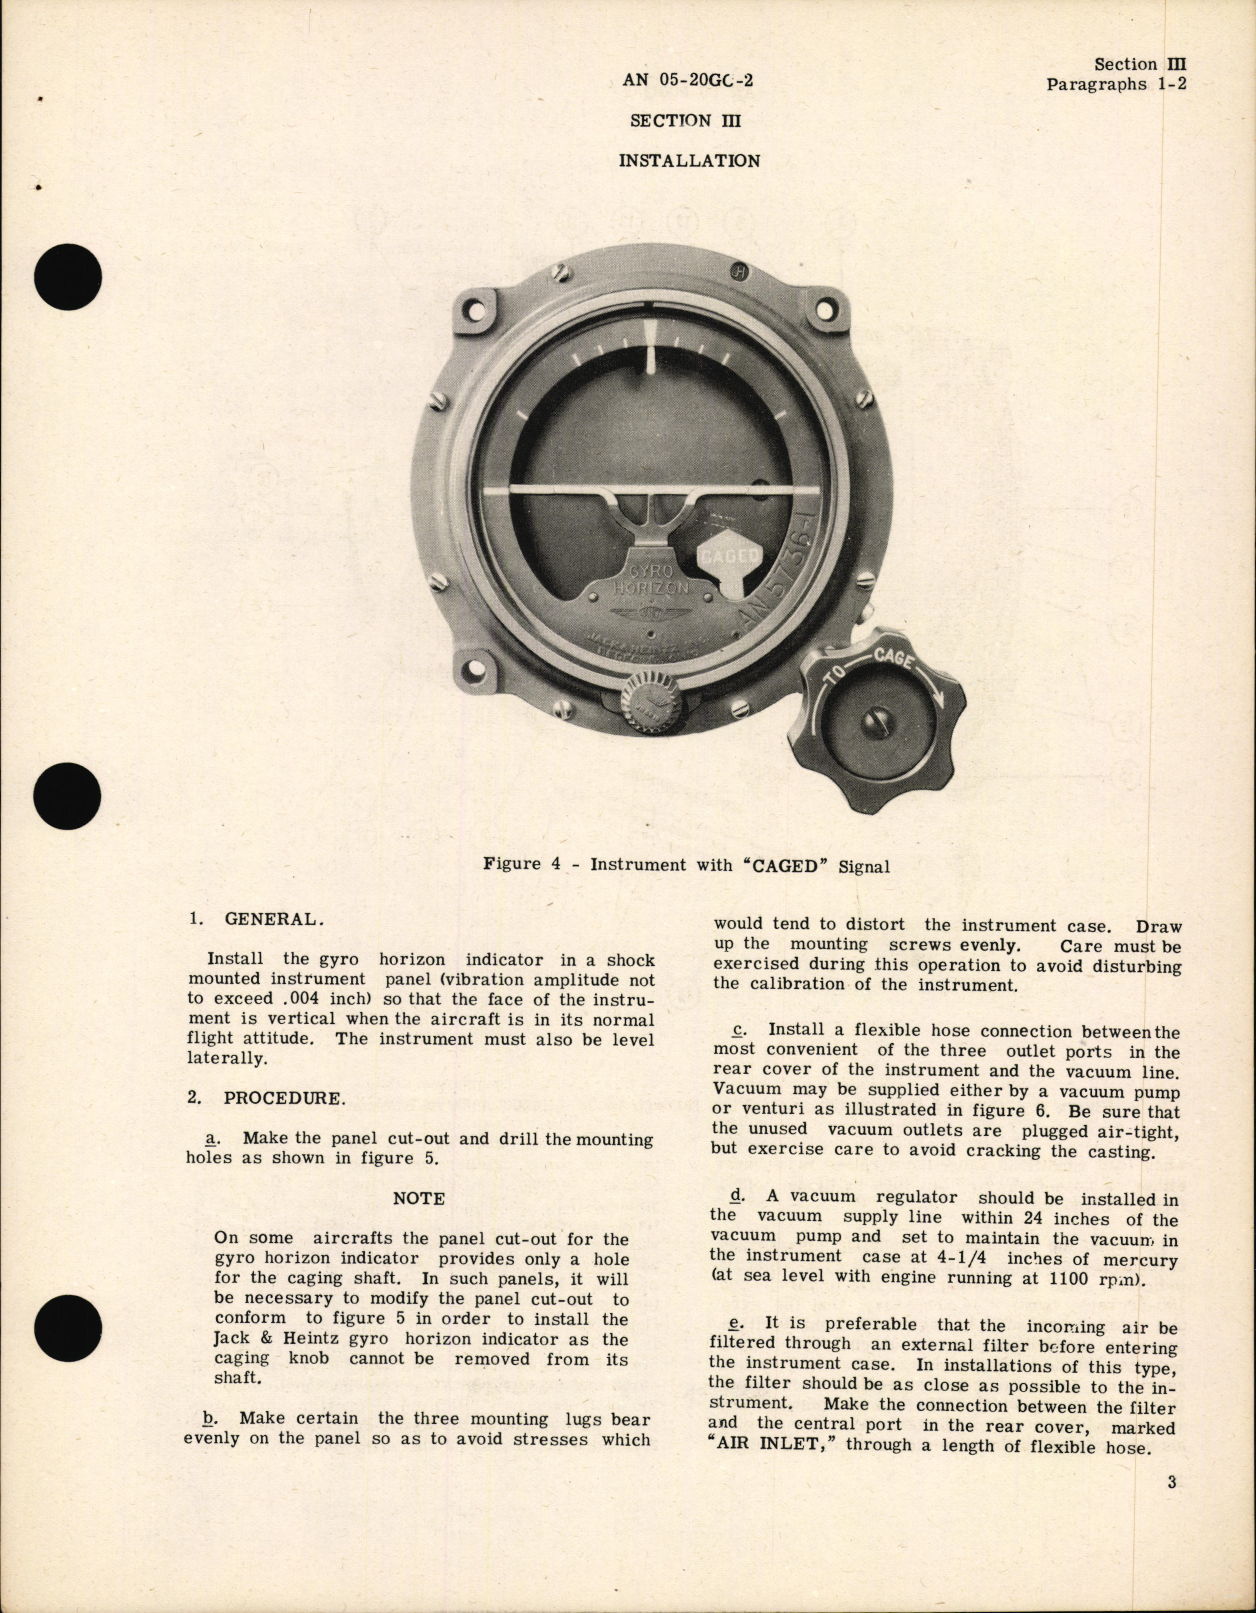 Sample page 7 from AirCorps Library document: Operation, Service, & Overhaul Instructions with Parts Catalog for Type AN 5736-1 F.S.S.C. 88-I-1350 Gyro Horizon Indicator